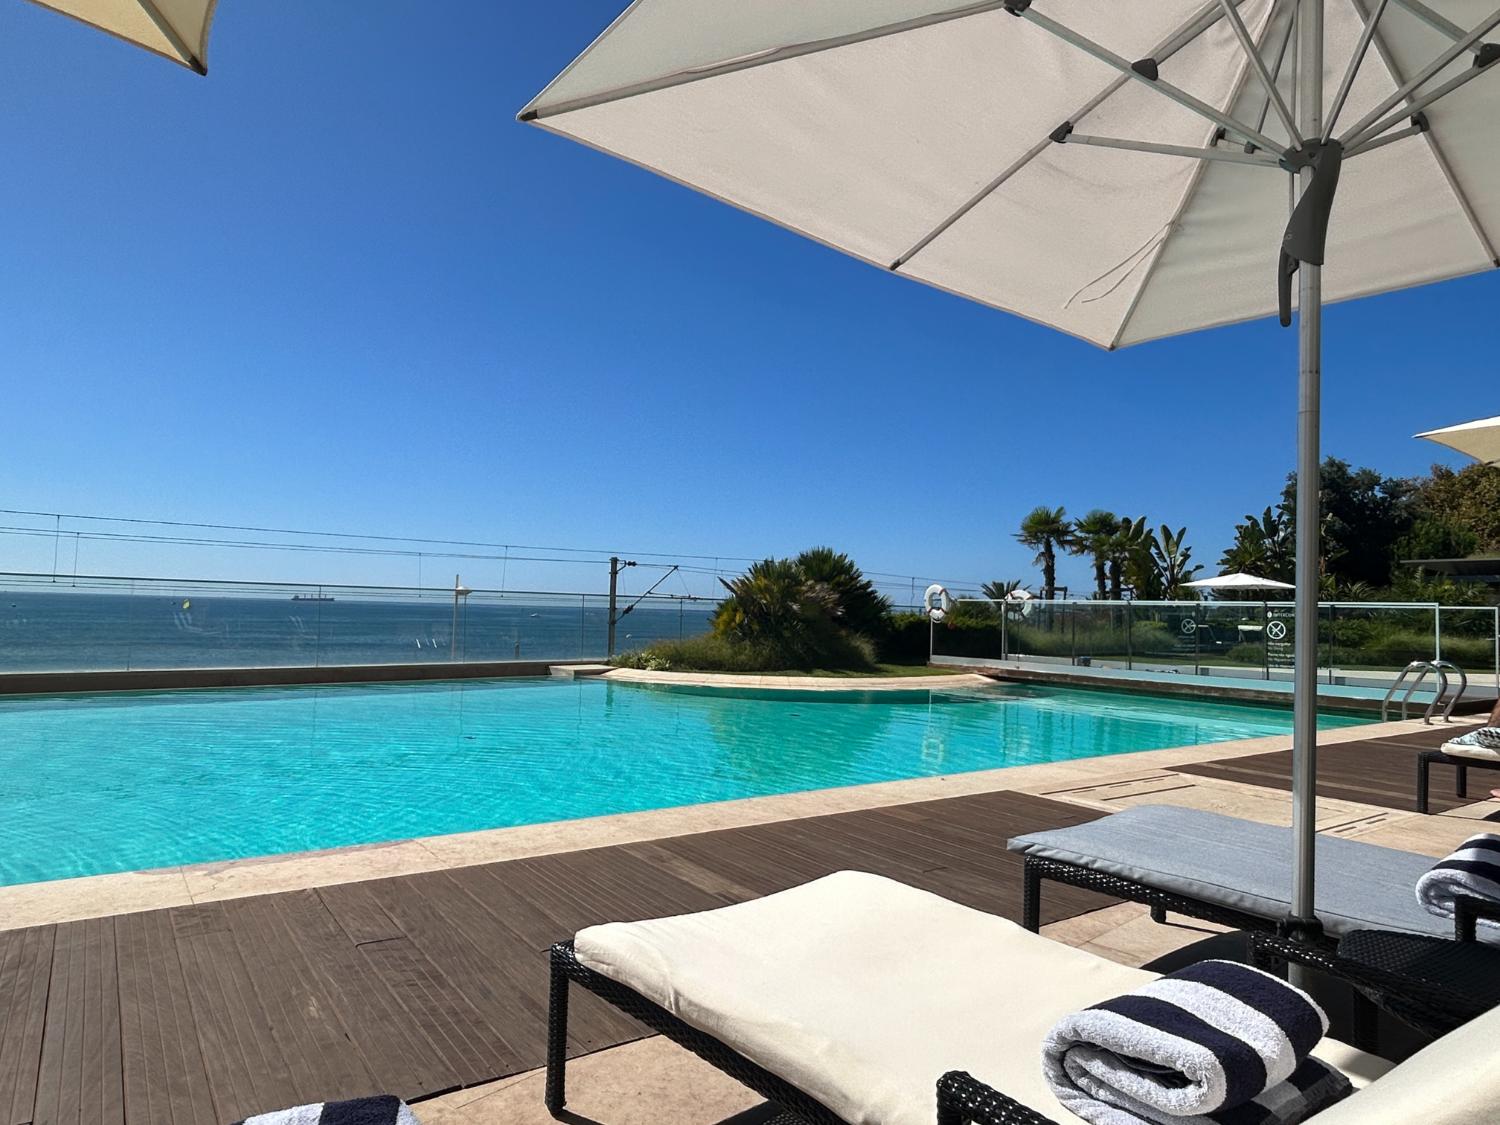 Opinions of Cascais Estoril Resort in Lisbon, Portugal